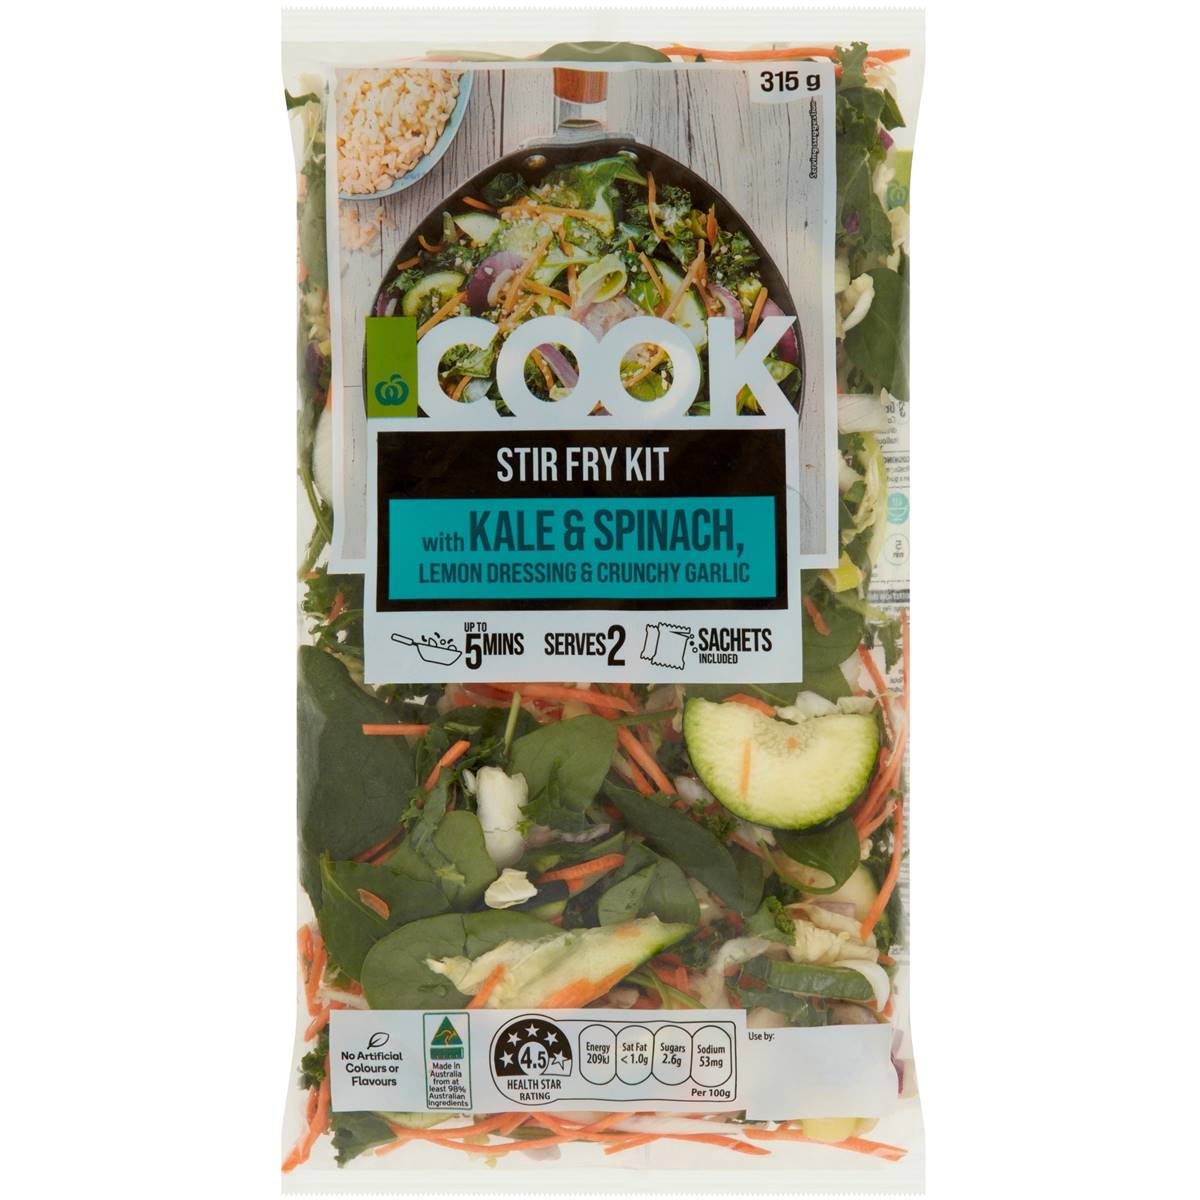 Calories in Woolworths Cook Kale & Spinach Stir-fry Kit